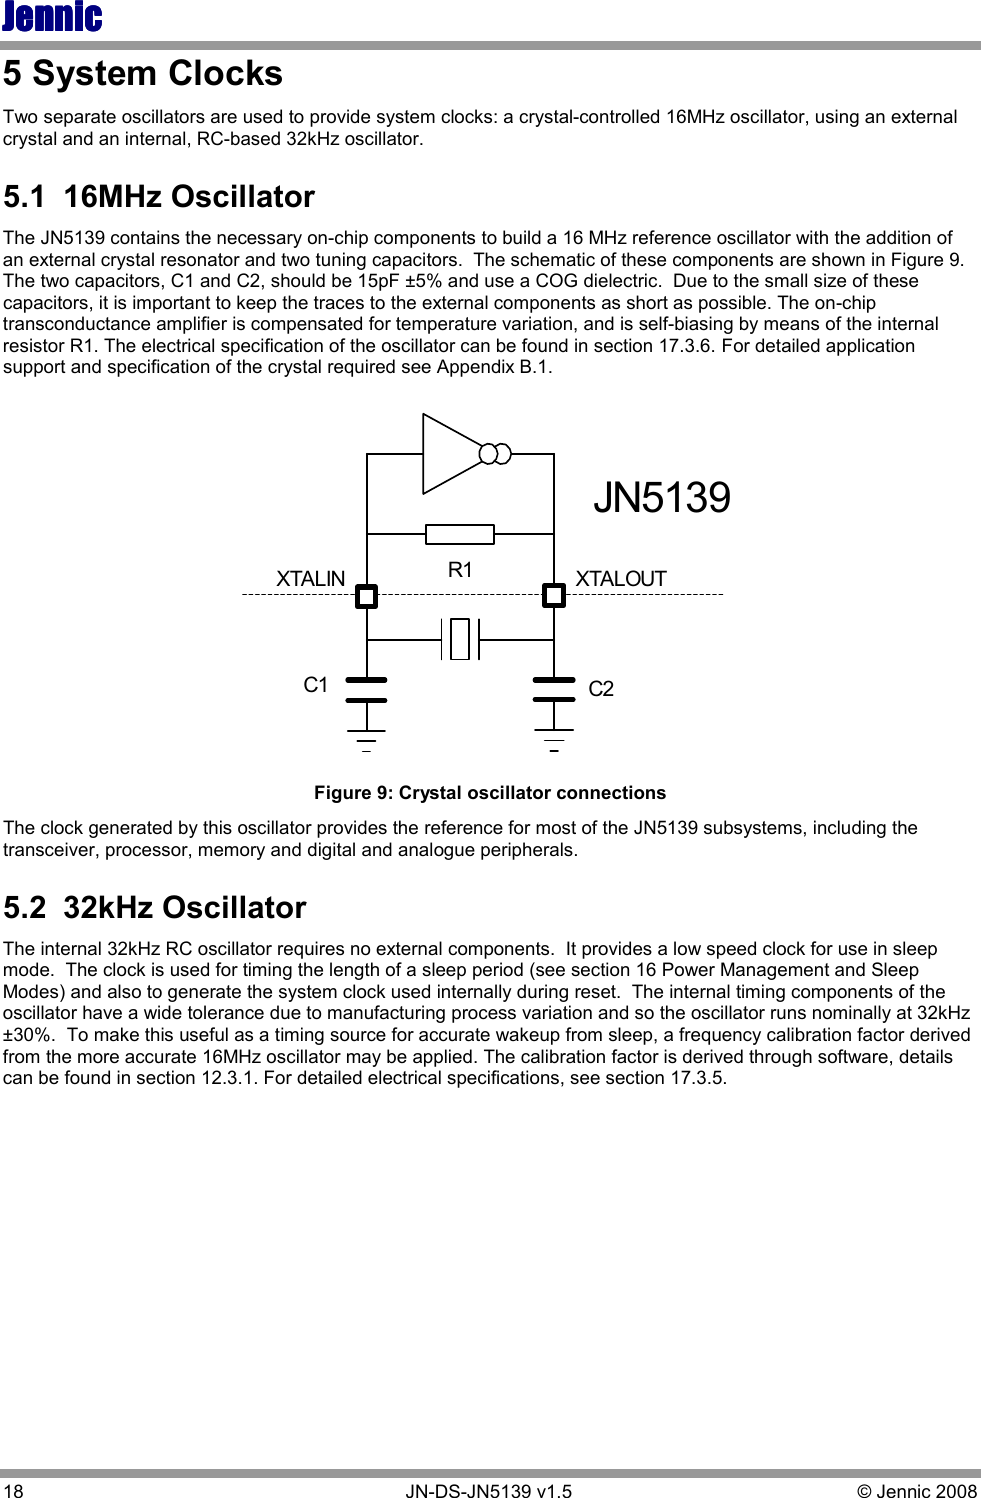 JennicJennicJennicJennic 18        JN-DS-JN5139 v1.5  © Jennic 2008  5 System Clocks Two separate oscillators are used to provide system clocks: a crystal-controlled 16MHz oscillator, using an external crystal and an internal, RC-based 32kHz oscillator. 5.1  16MHz Oscillator The JN5139 contains the necessary on-chip components to build a 16 MHz reference oscillator with the addition of an external crystal resonator and two tuning capacitors.  The schematic of these components are shown in Figure 9.  The two capacitors, C1 and C2, should be 15pF ±5% and use a COG dielectric.  Due to the small size of these capacitors, it is important to keep the traces to the external components as short as possible. The on-chip transconductance amplifier is compensated for temperature variation, and is self-biasing by means of the internal resistor R1. The electrical specification of the oscillator can be found in section 17.3.6. For detailed application support and specification of the crystal required see Appendix B.1. XTALOUTC2C1R1XTALINJN5139 Figure 9: Crystal oscillator connections  The clock generated by this oscillator provides the reference for most of the JN5139 subsystems, including the transceiver, processor, memory and digital and analogue peripherals.   5.2  32kHz Oscillator The internal 32kHz RC oscillator requires no external components.  It provides a low speed clock for use in sleep mode.  The clock is used for timing the length of a sleep period (see section 16 Power Management and Sleep Modes) and also to generate the system clock used internally during reset.  The internal timing components of the oscillator have a wide tolerance due to manufacturing process variation and so the oscillator runs nominally at 32kHz ±30%.  To make this useful as a timing source for accurate wakeup from sleep, a frequency calibration factor derived from the more accurate 16MHz oscillator may be applied. The calibration factor is derived through software, details can be found in section 12.3.1. For detailed electrical specifications, see section 17.3.5.  